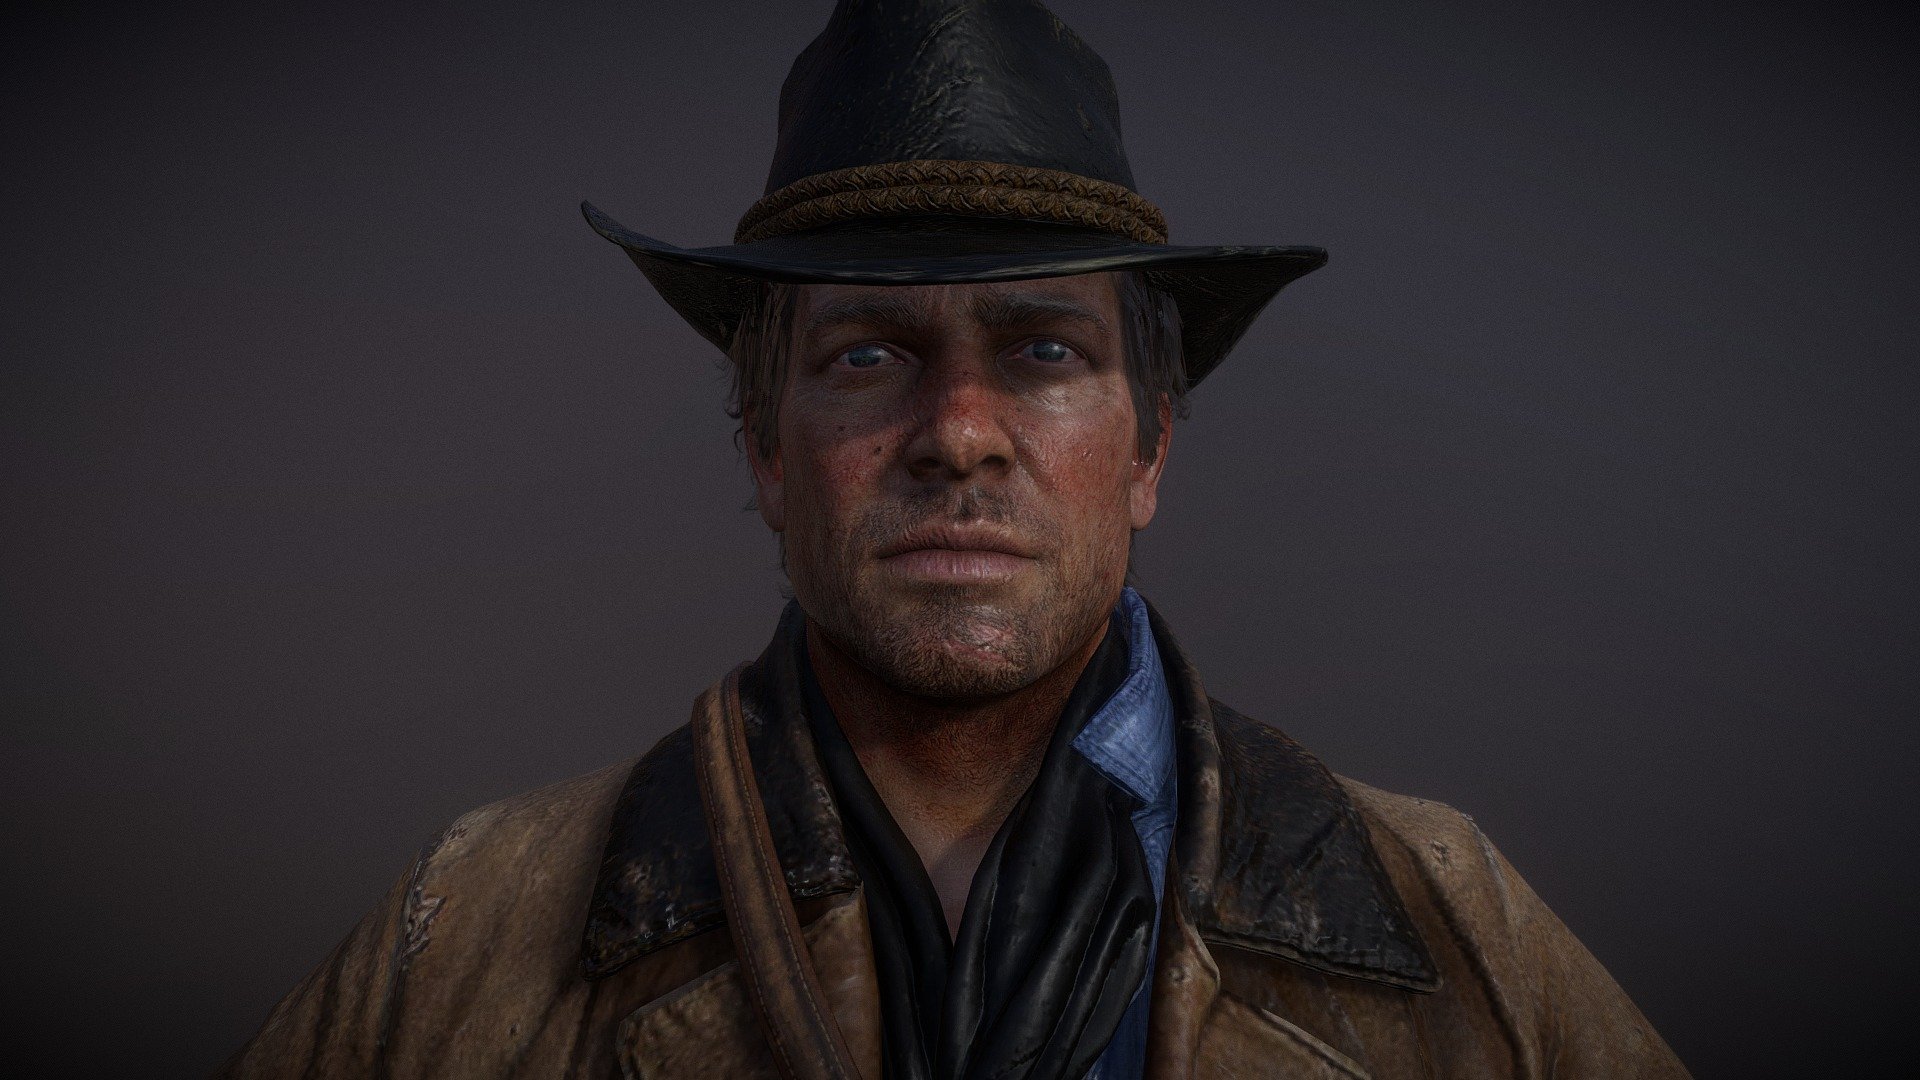 A Rigged model of Arthur Morgan from (Red Dead Redemption 2)
(rights belong to rockstar games) - Arthur Morgan rigged (Red Dead Redemption 2) - Download Free 3D model by dr_coincidental 3d model